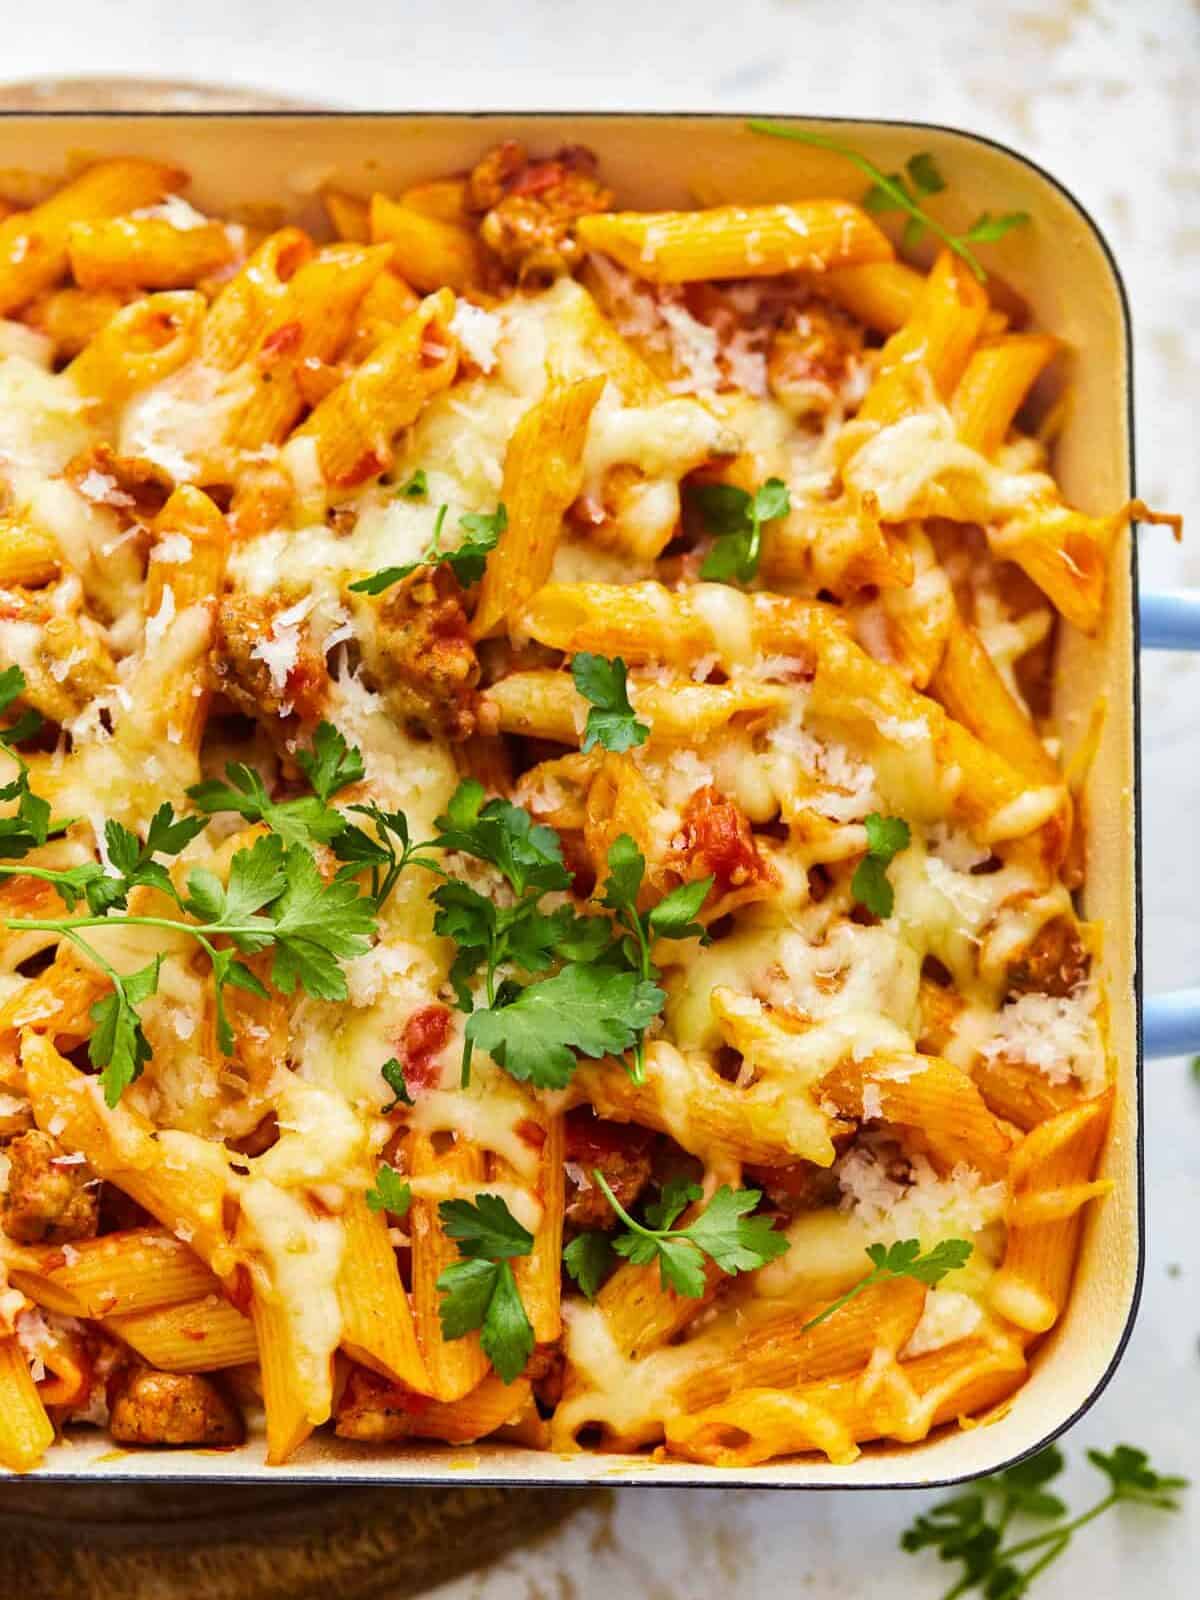 close up on a dish go baked mostaccioli pasta covered in cheese